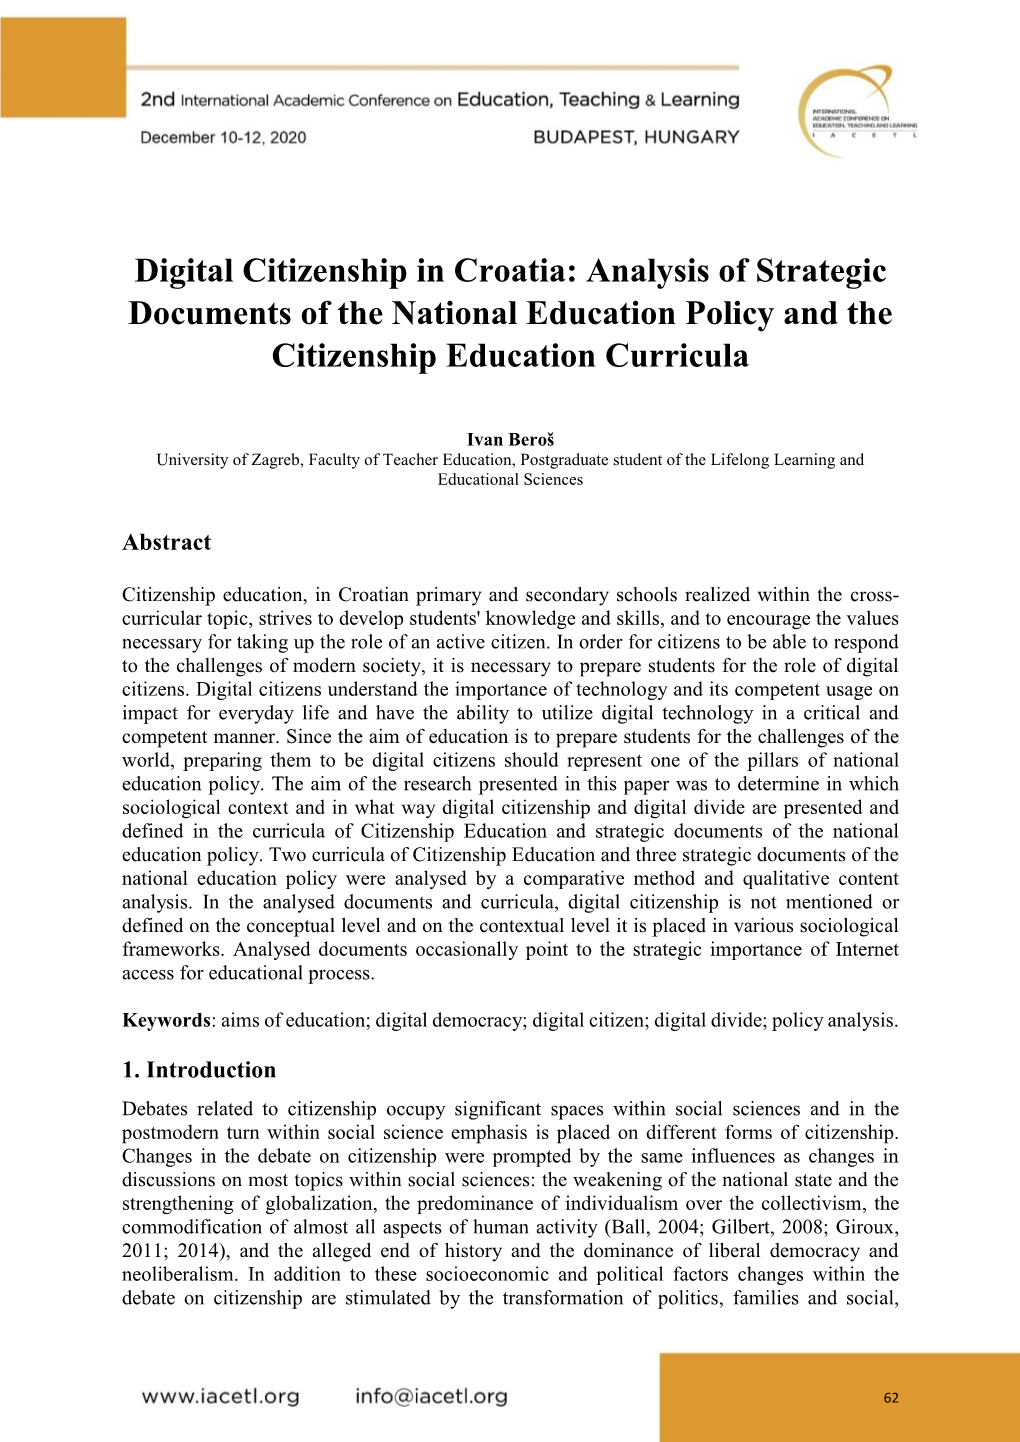 Digital Citizenship in Croatia: Analysis of Strategic Documents of the National Education Policy and the Citizenship Education Curricula